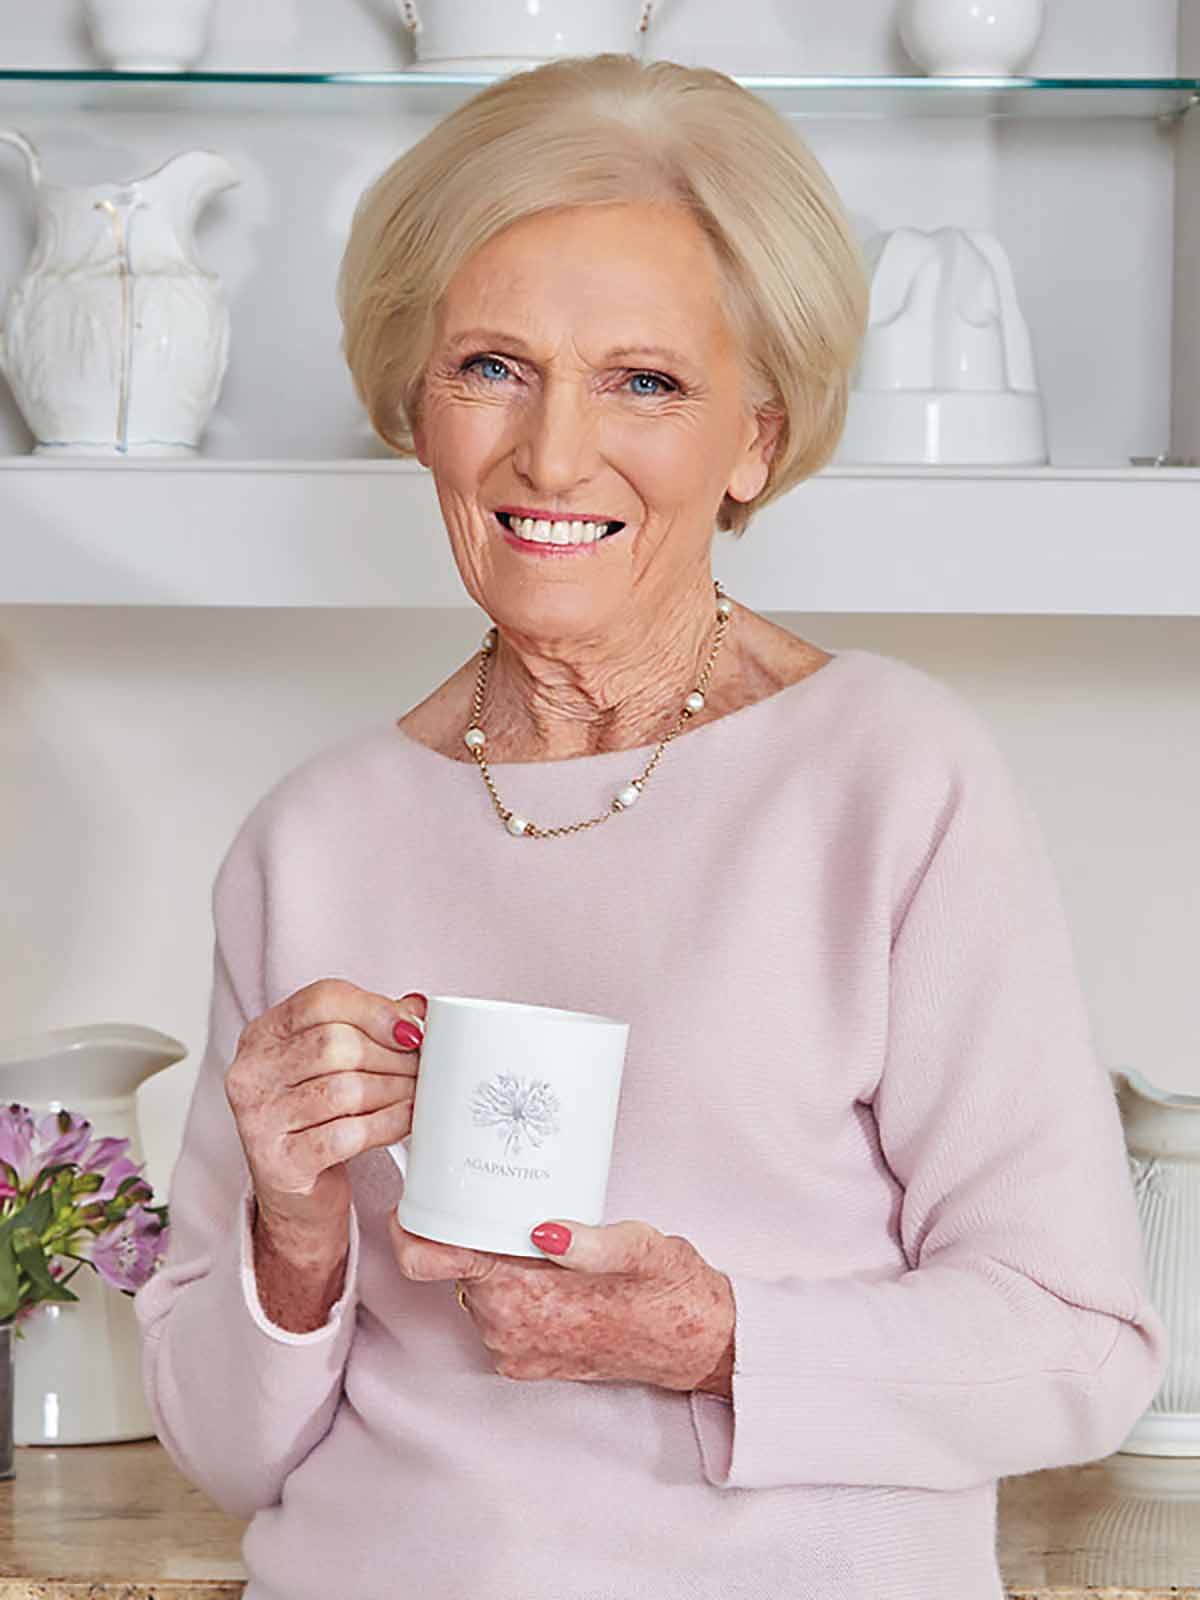 Mary Berry from The Great British Bake Off